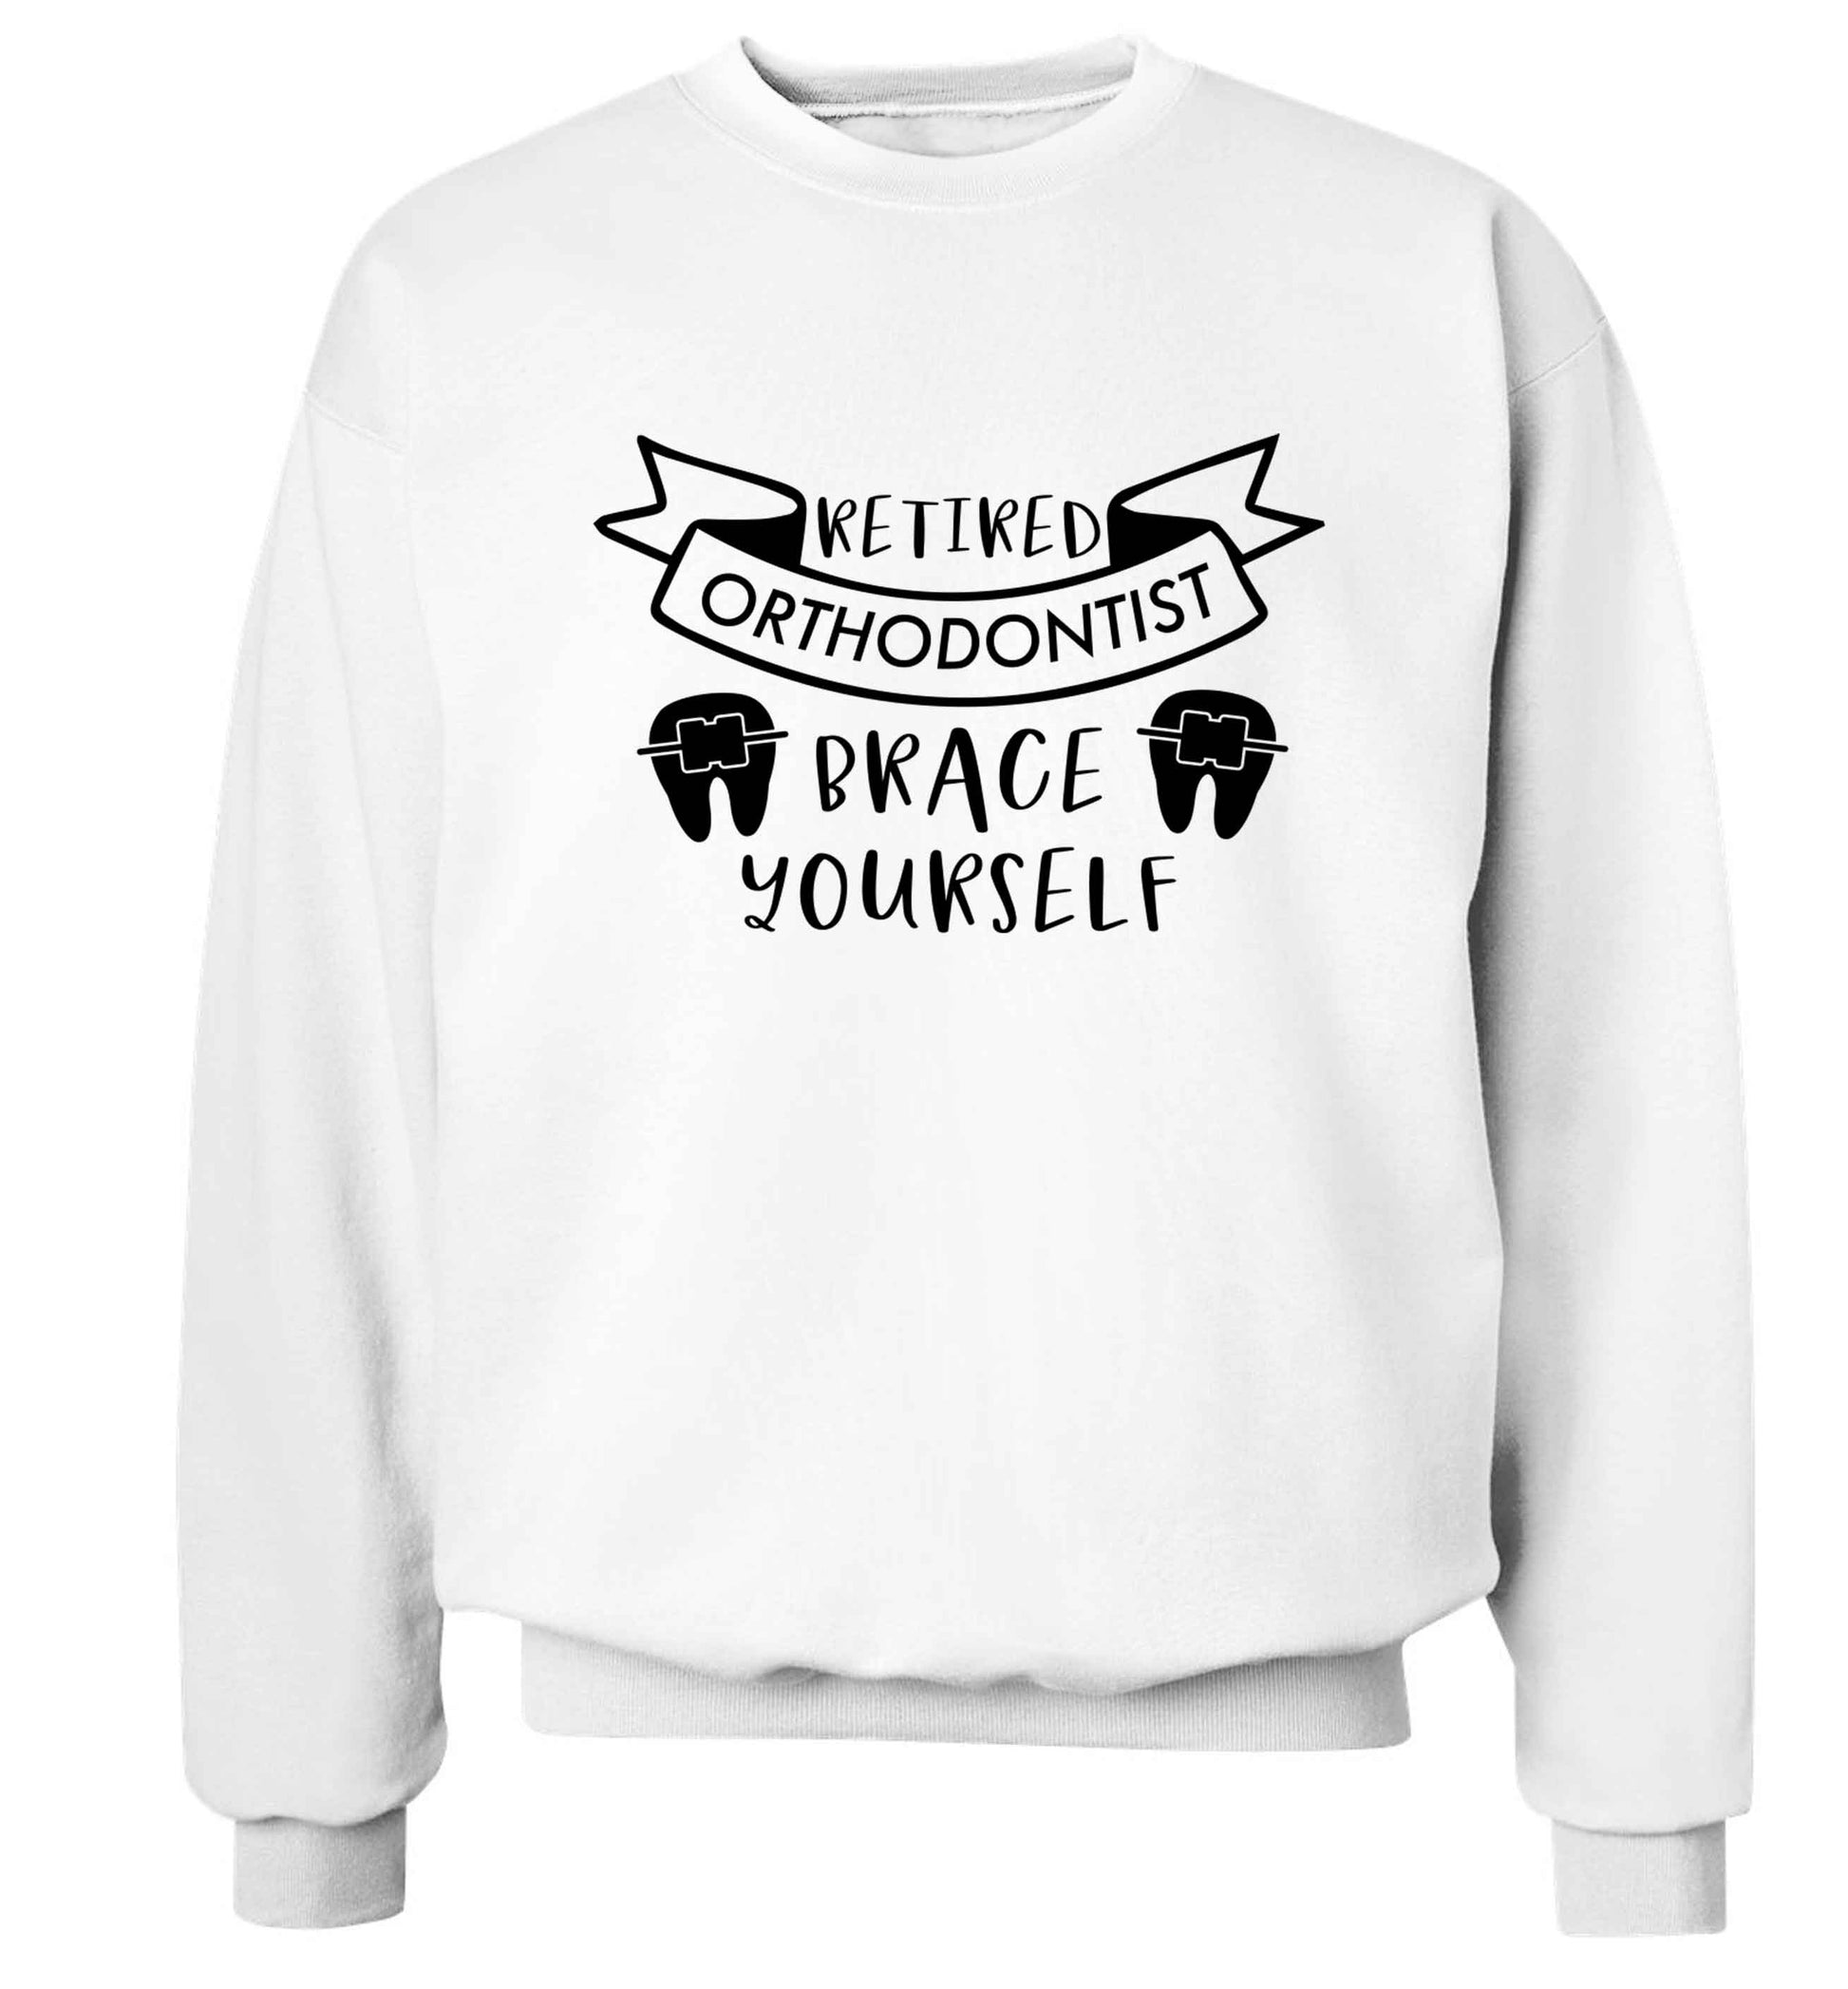 Retired orthodontist brace yourself Adult's unisex white Sweater 2XL